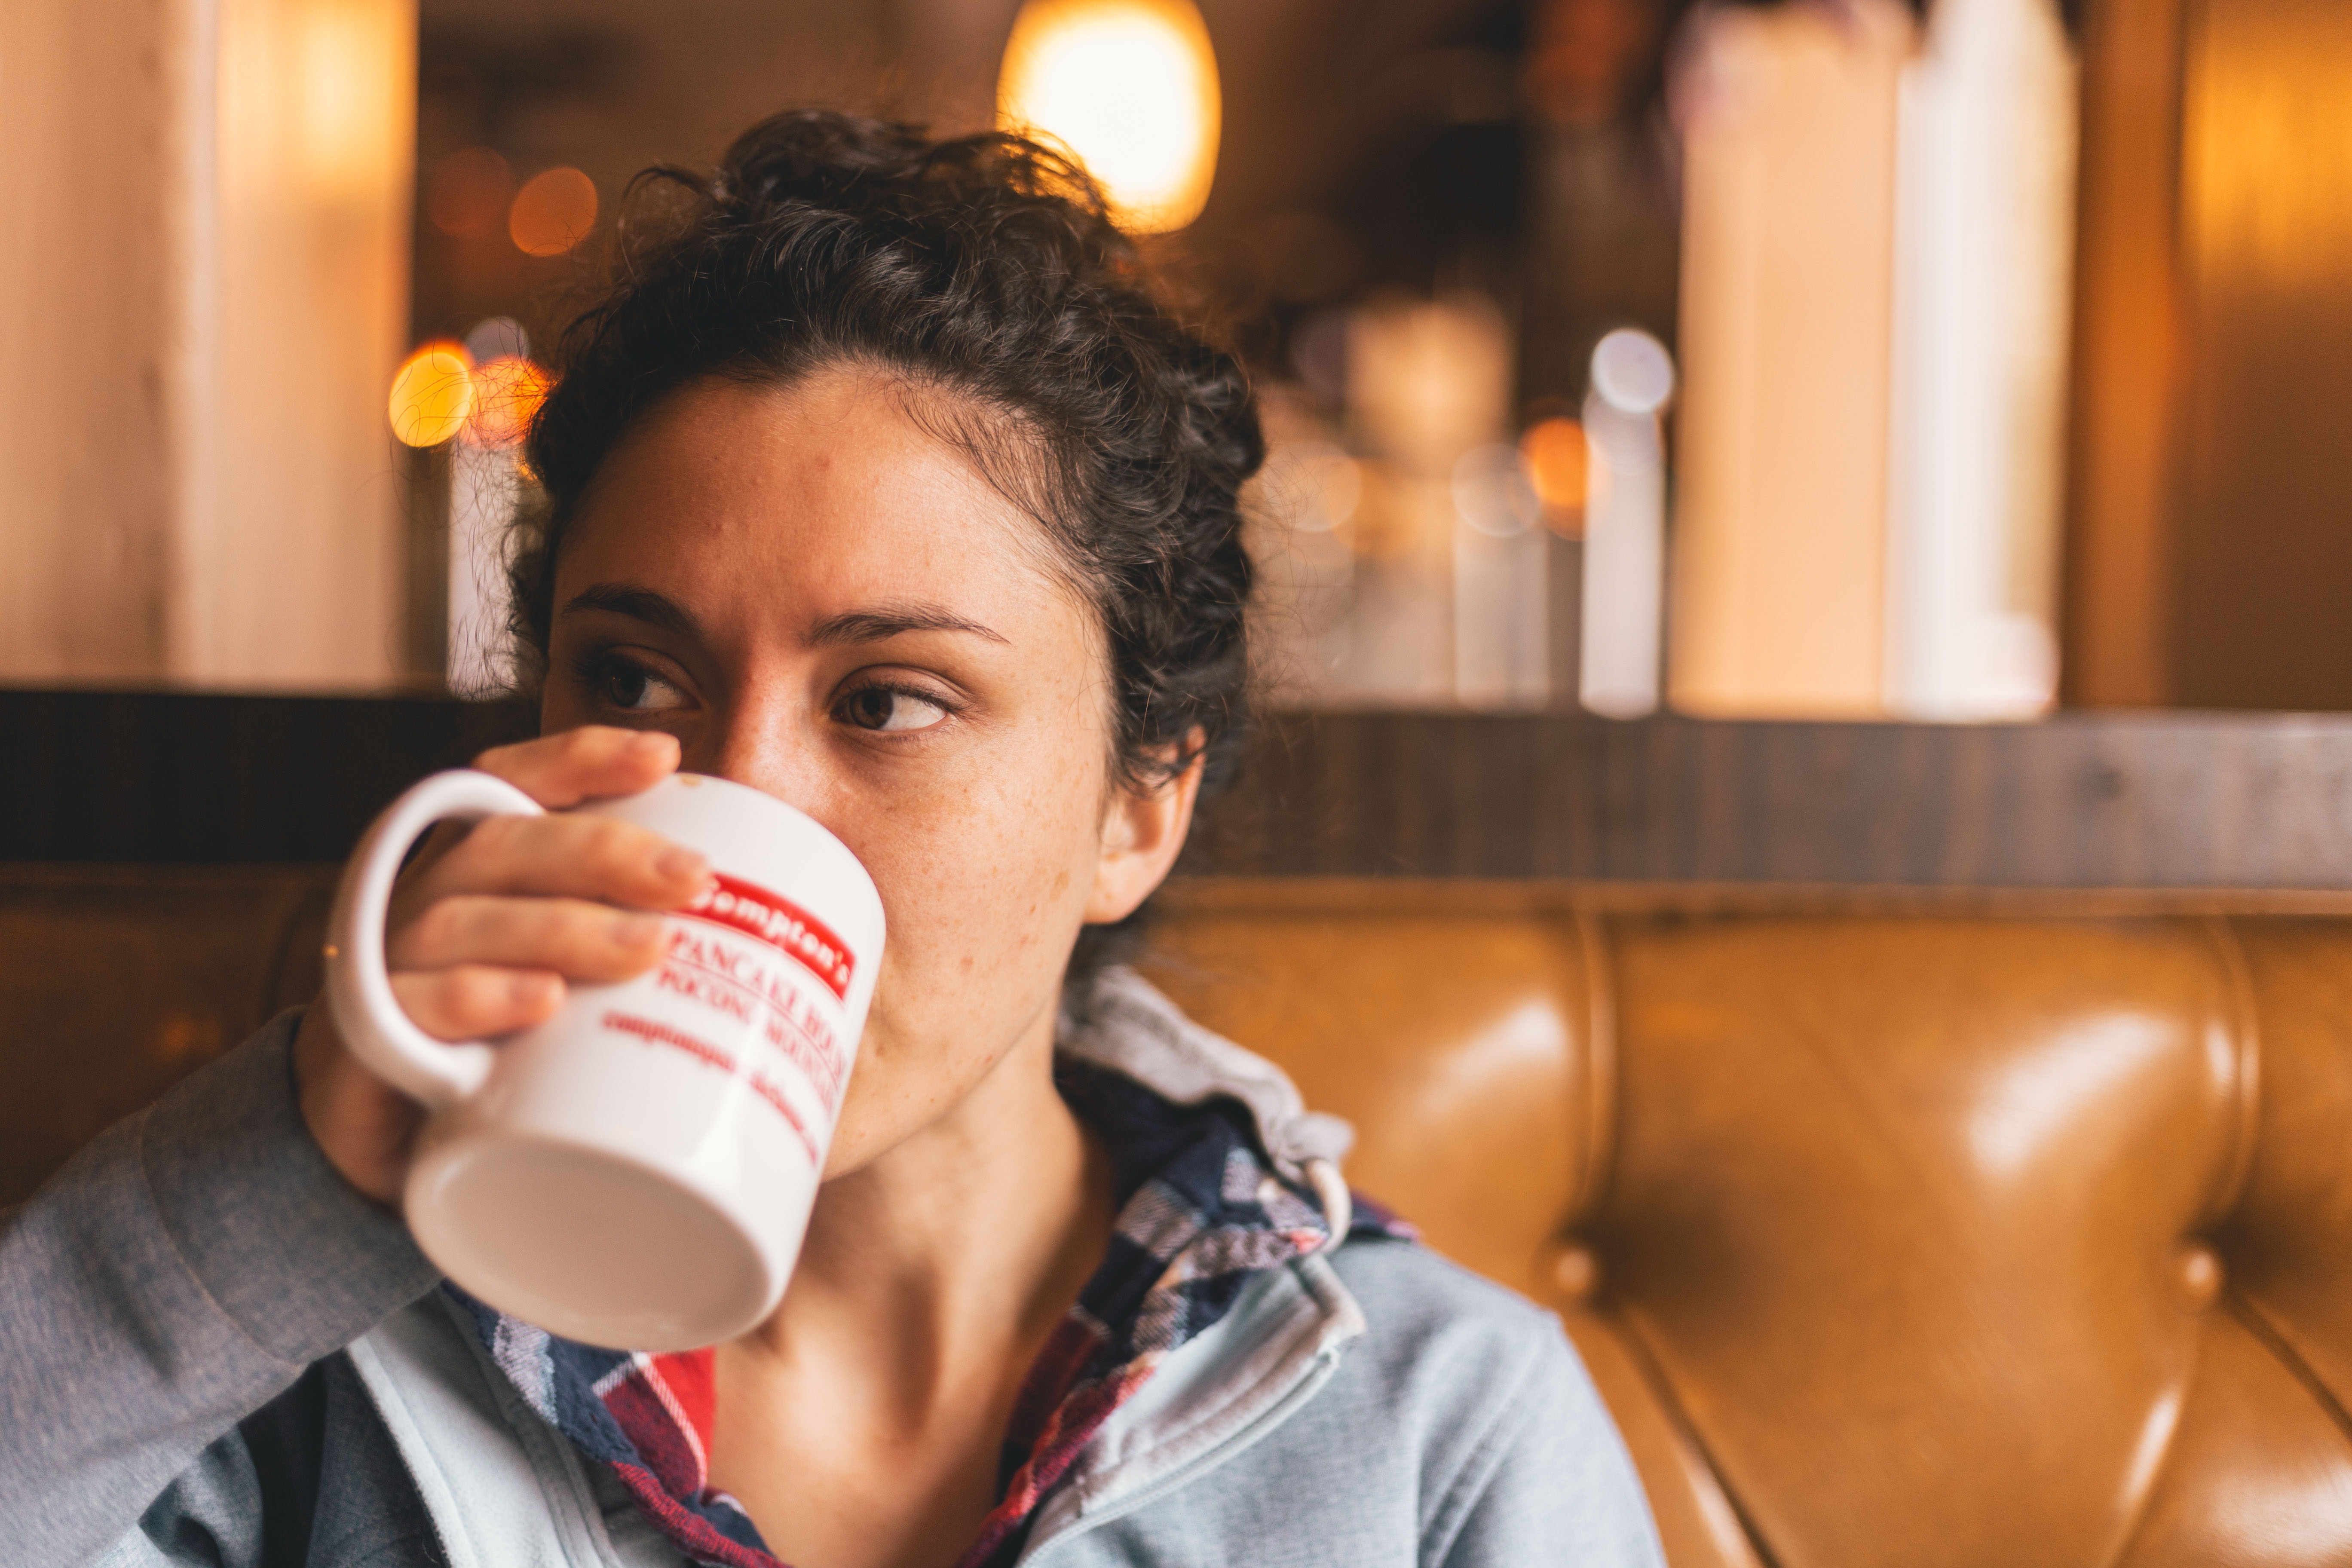 Woman drinking cup of coffee